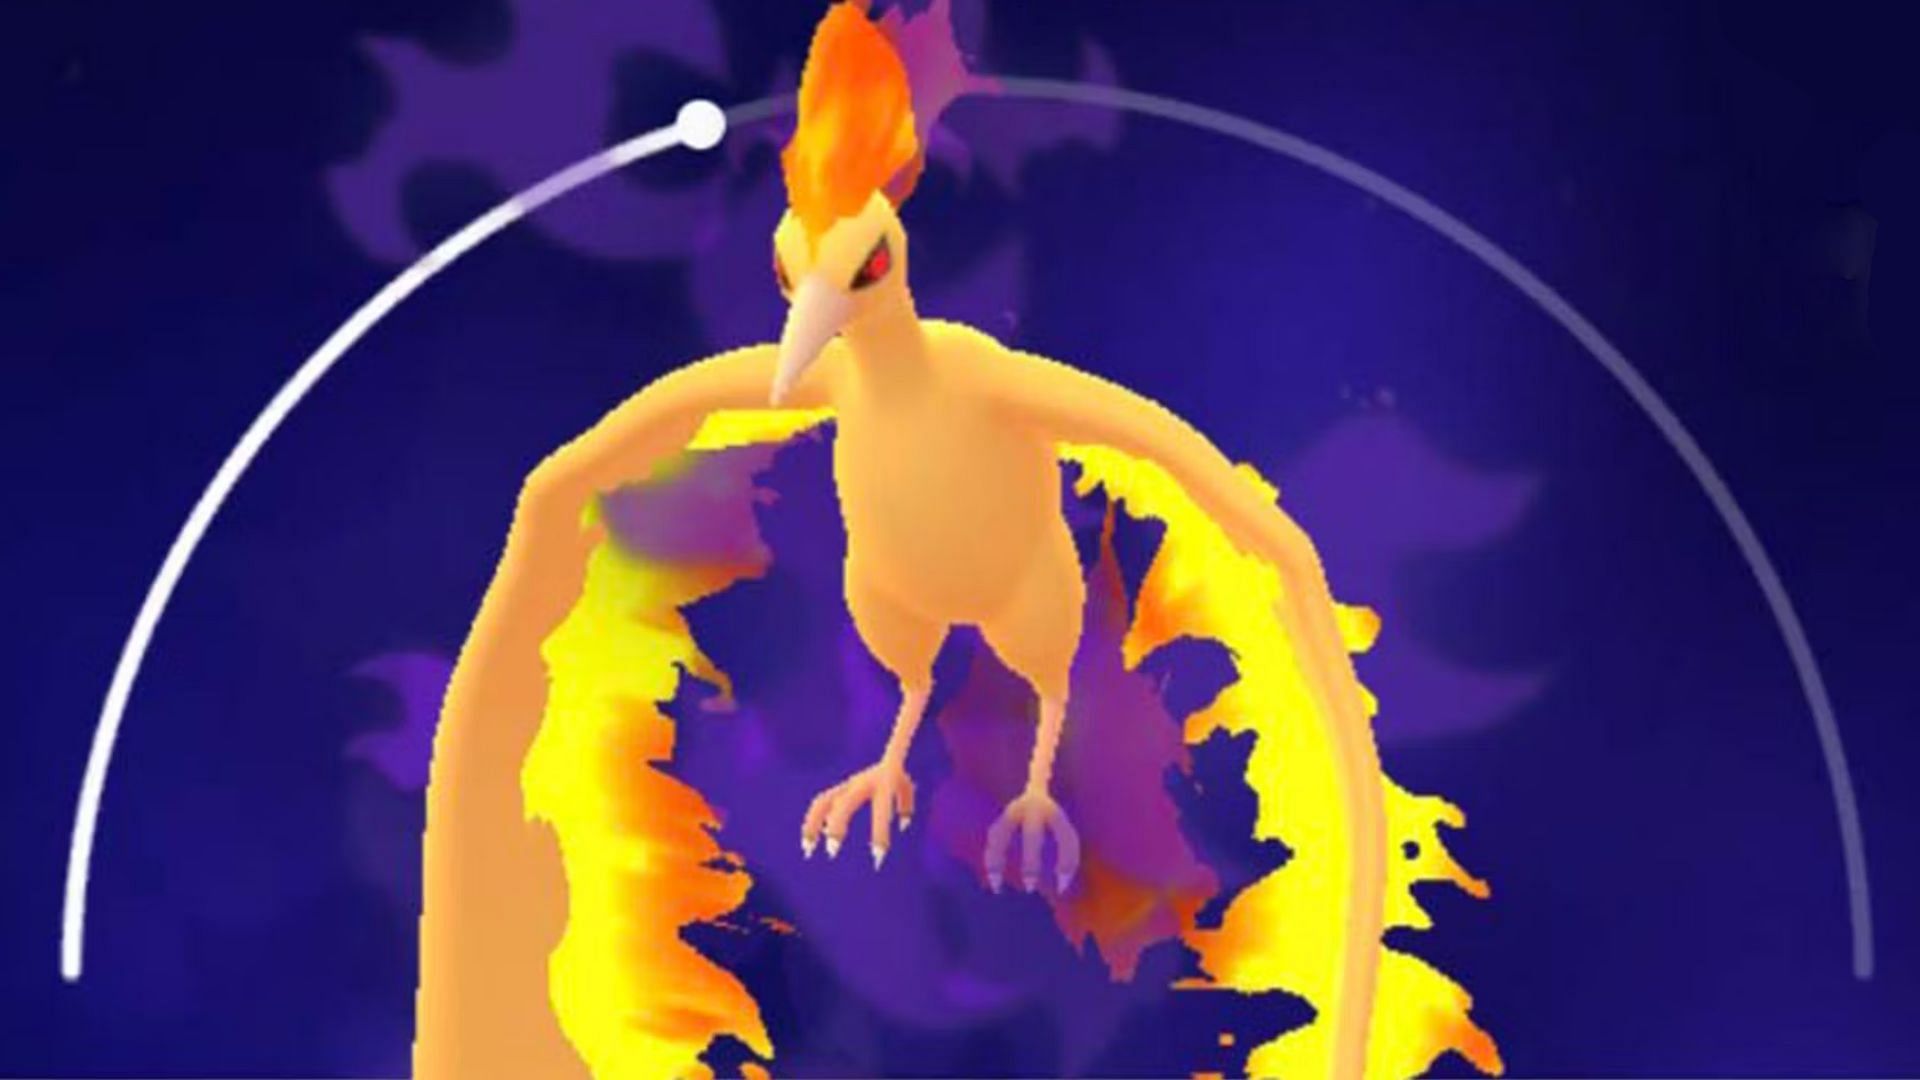 Will you be raiding Moltres in Pokemon GO? Here are the best